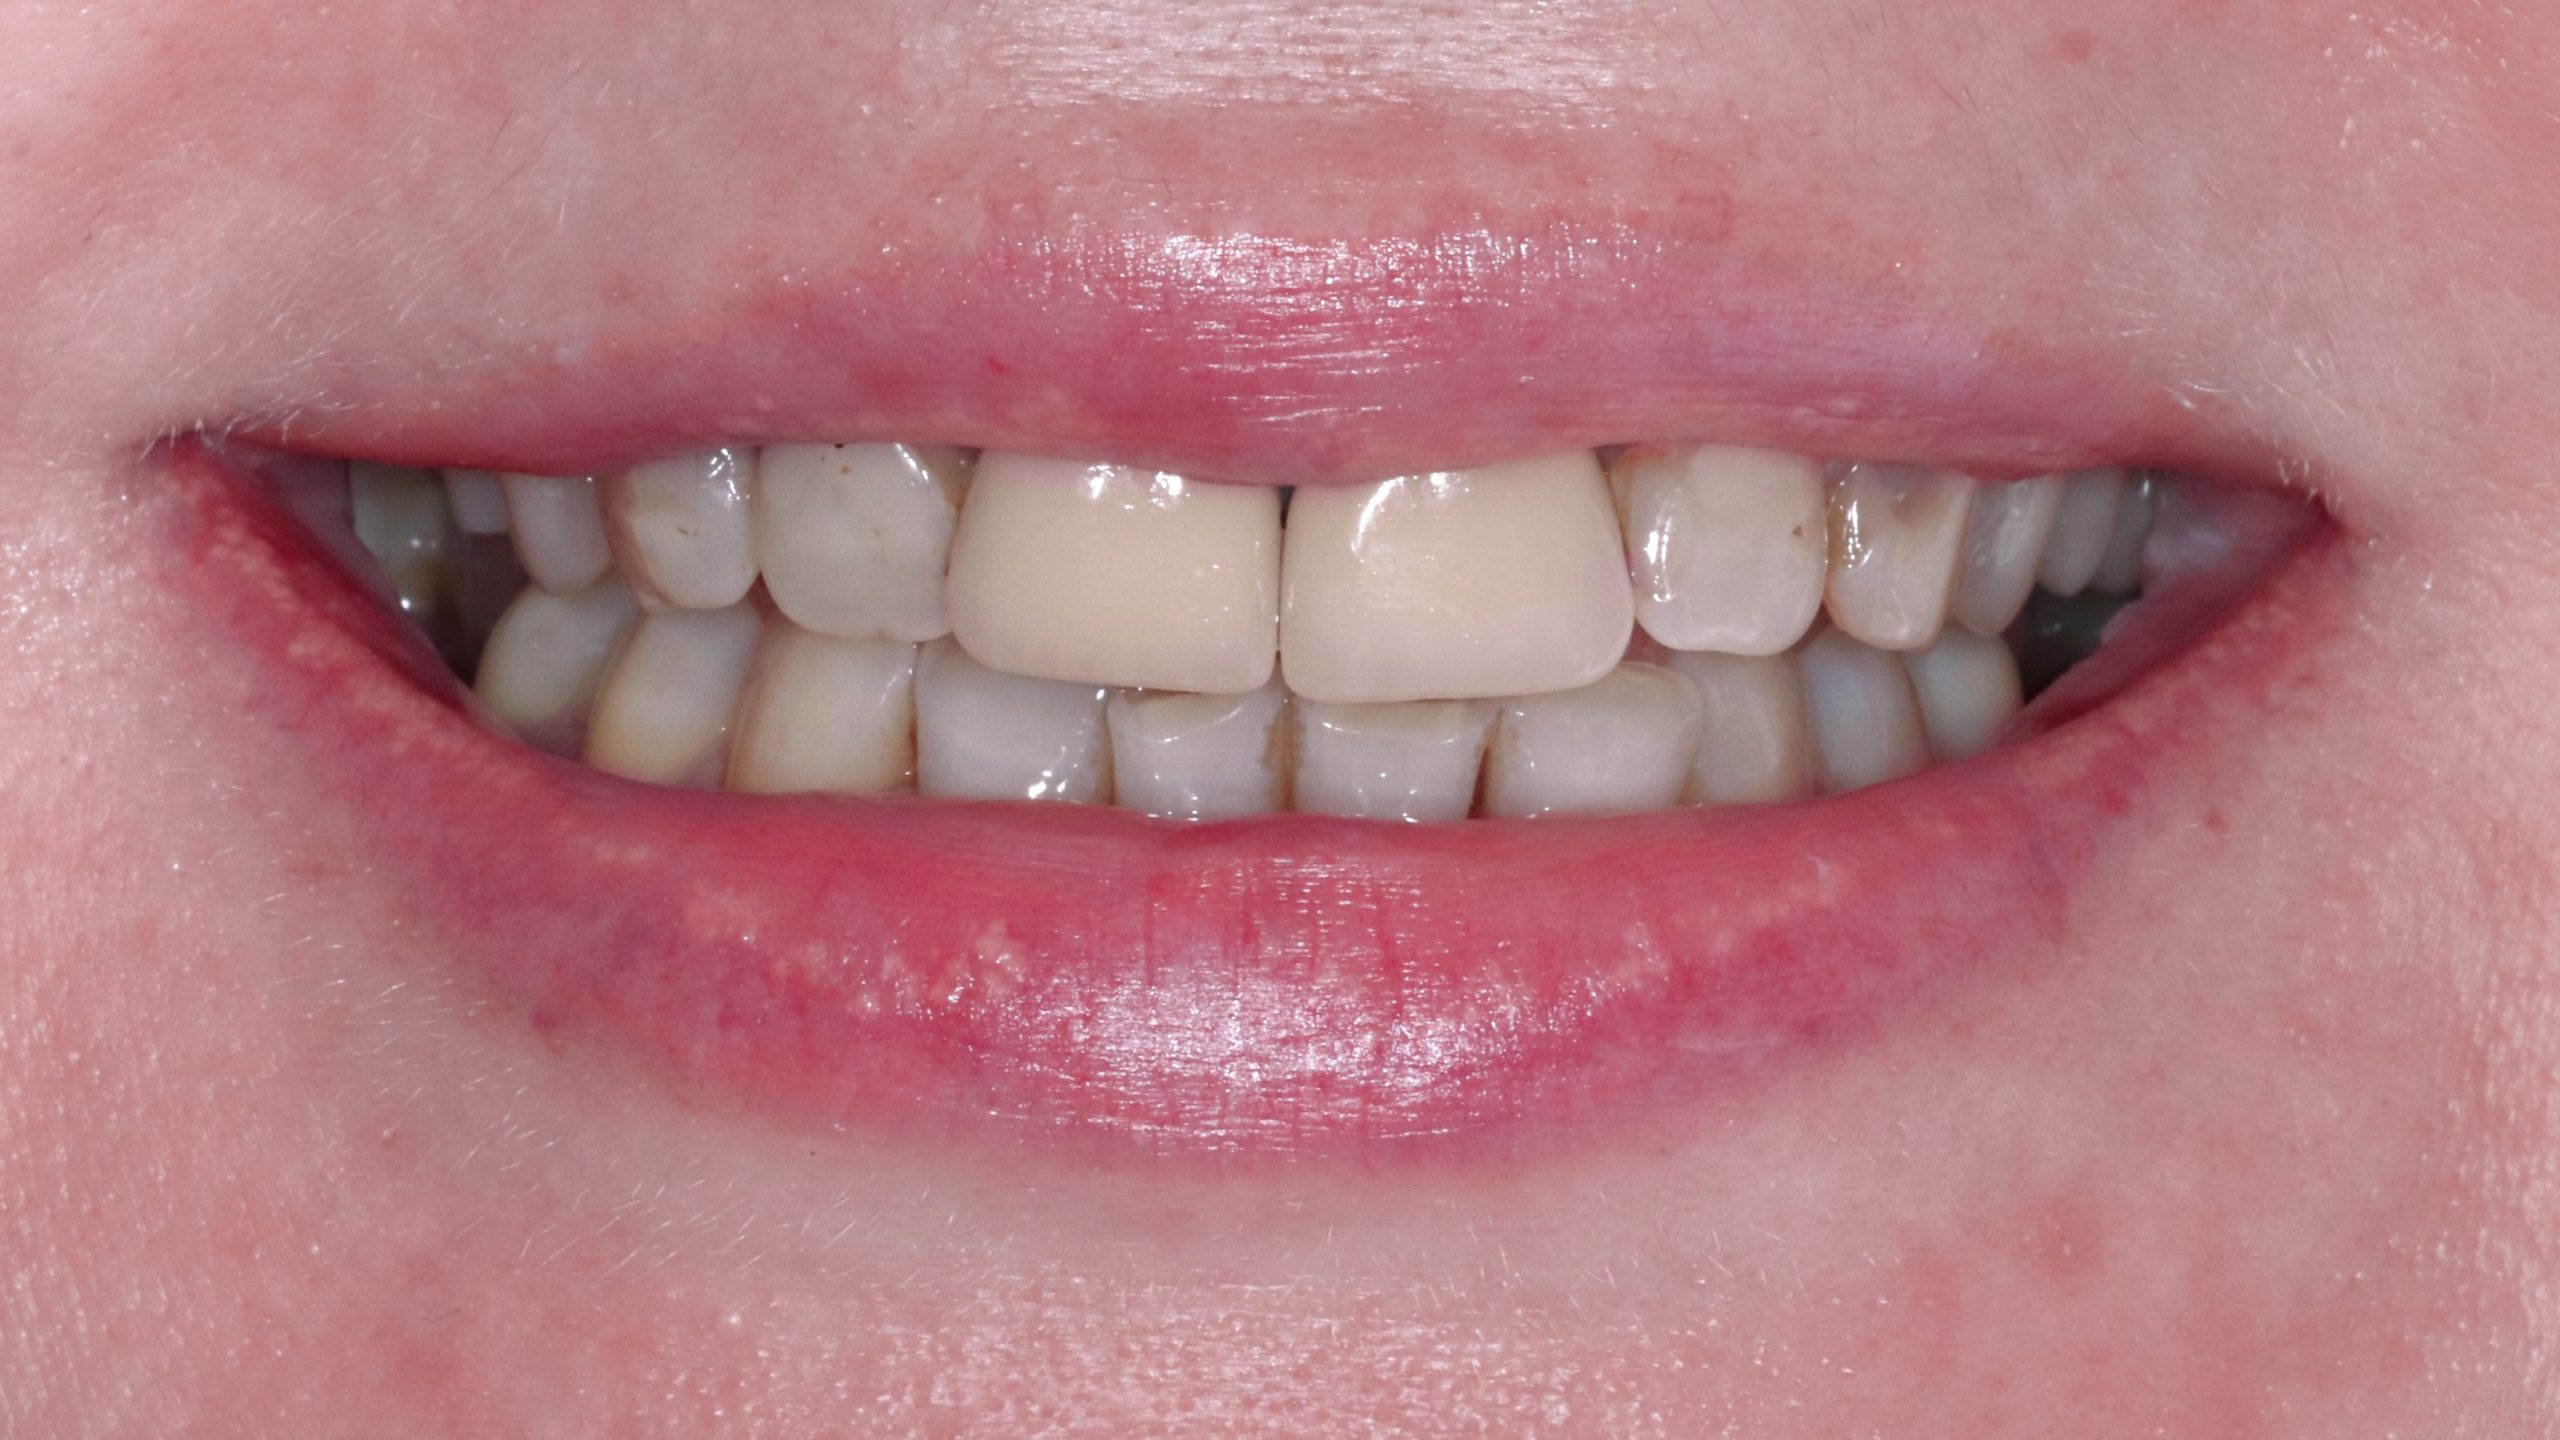 bleaching-veneers-munich-patient-showcase-before-after-treatment-result-initual-situation